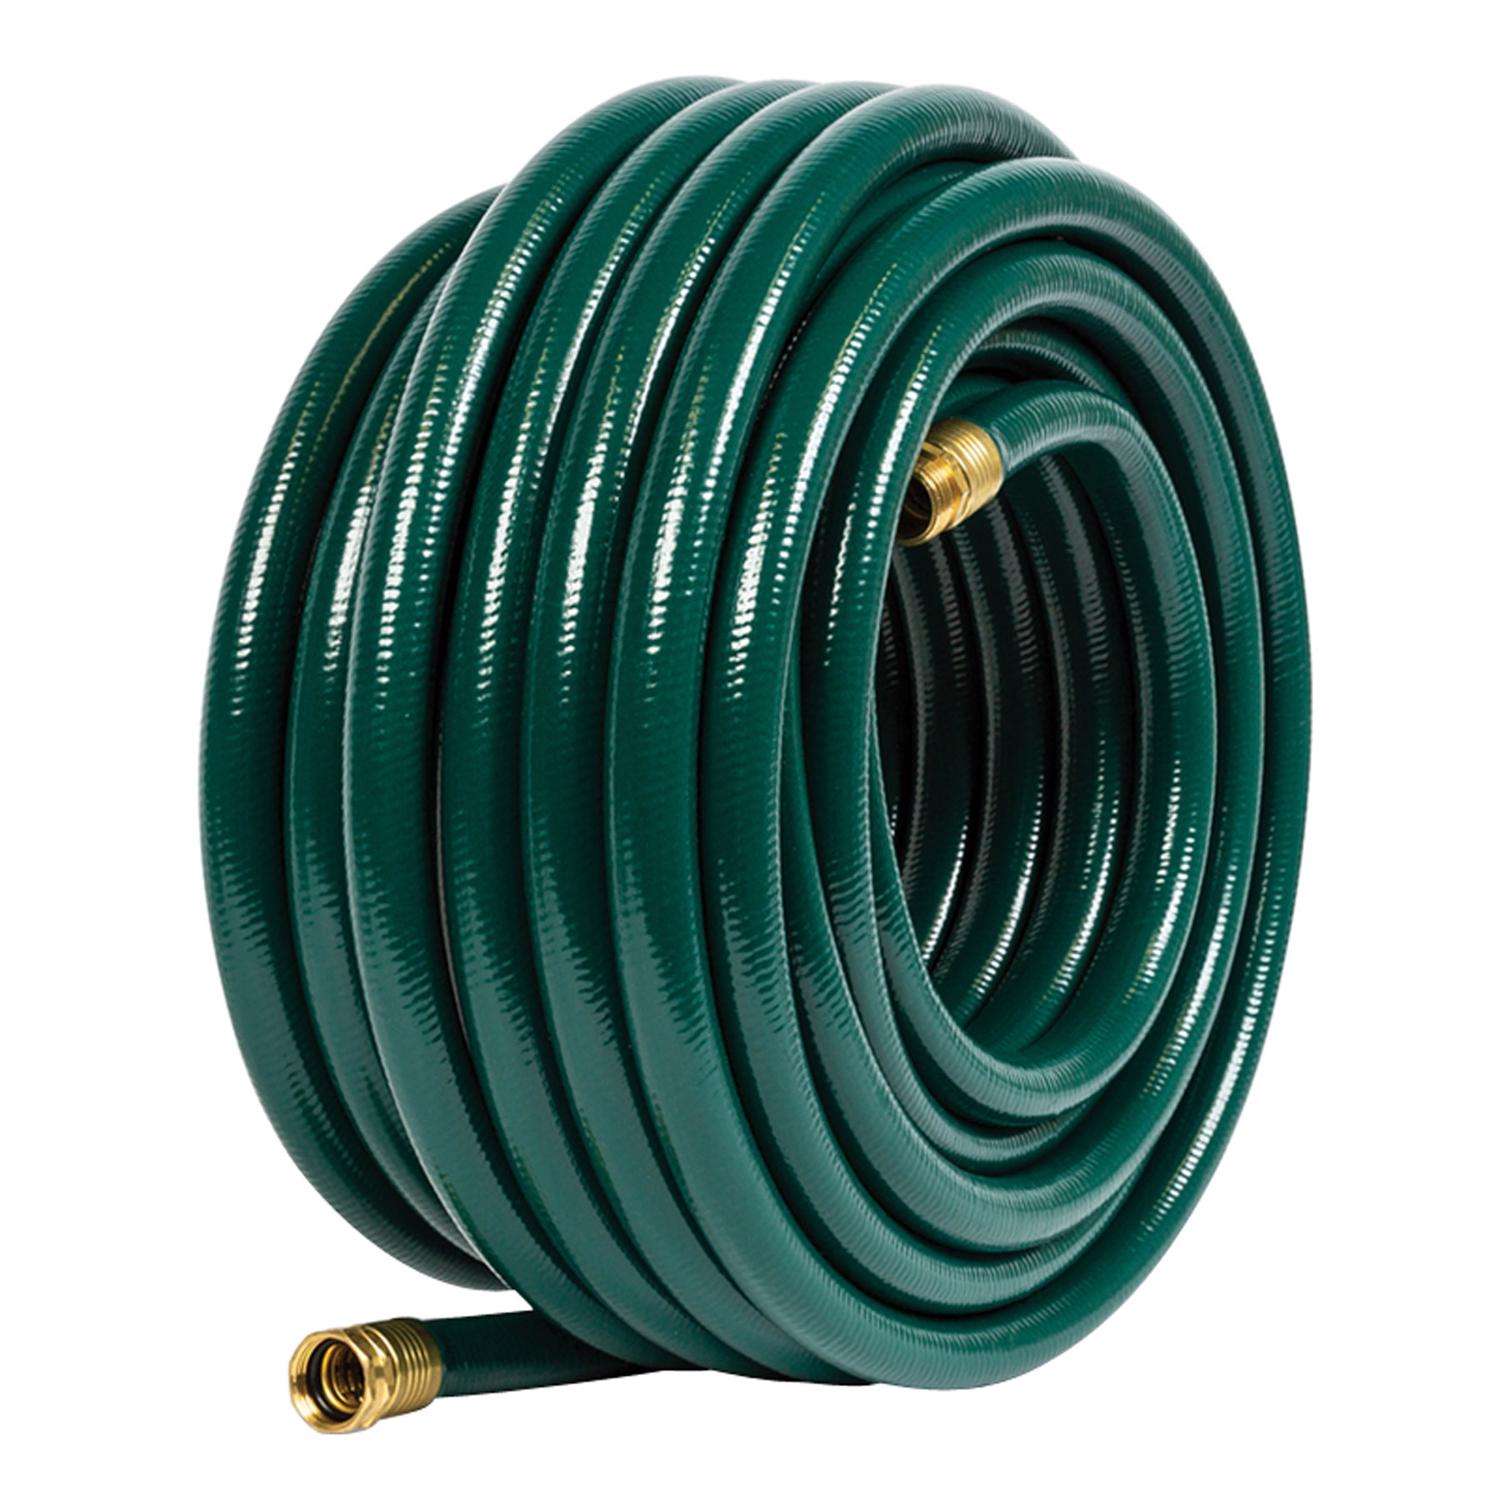 NEW UNUSED GILMOUR 6" Faucet Hose KINK PROTECTOR Green w/ BRASS FITTINGS